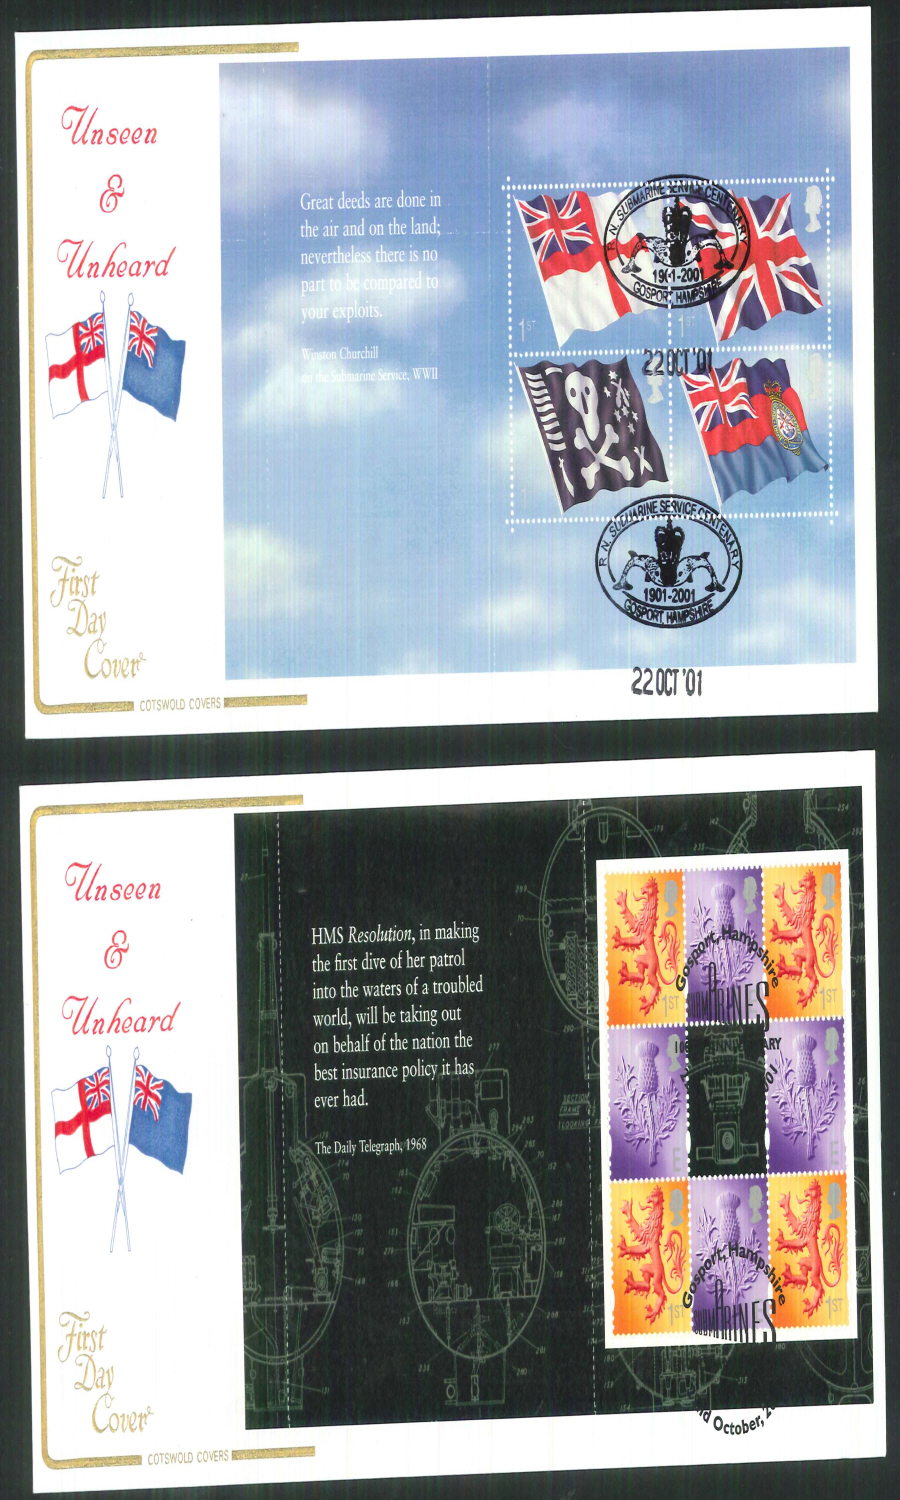 2001 - Cotswold Unseen & Unheard - Prestige Stamp Book Set of 4 Covers - Various Postmarks